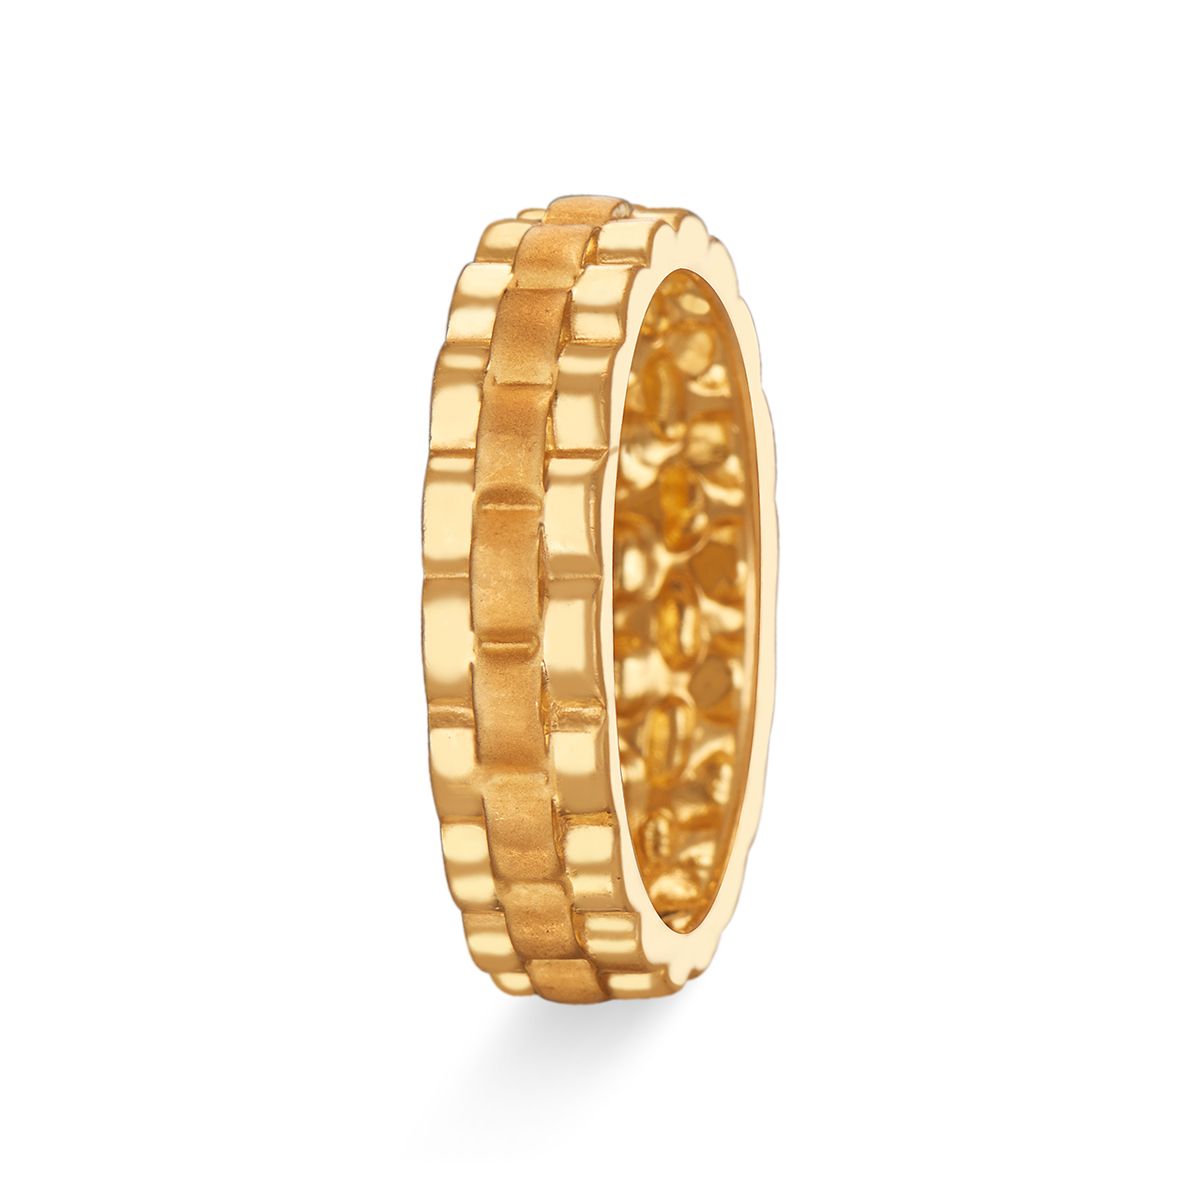 Buy Gold Rings Online | Latest Gold Ring Designs in India